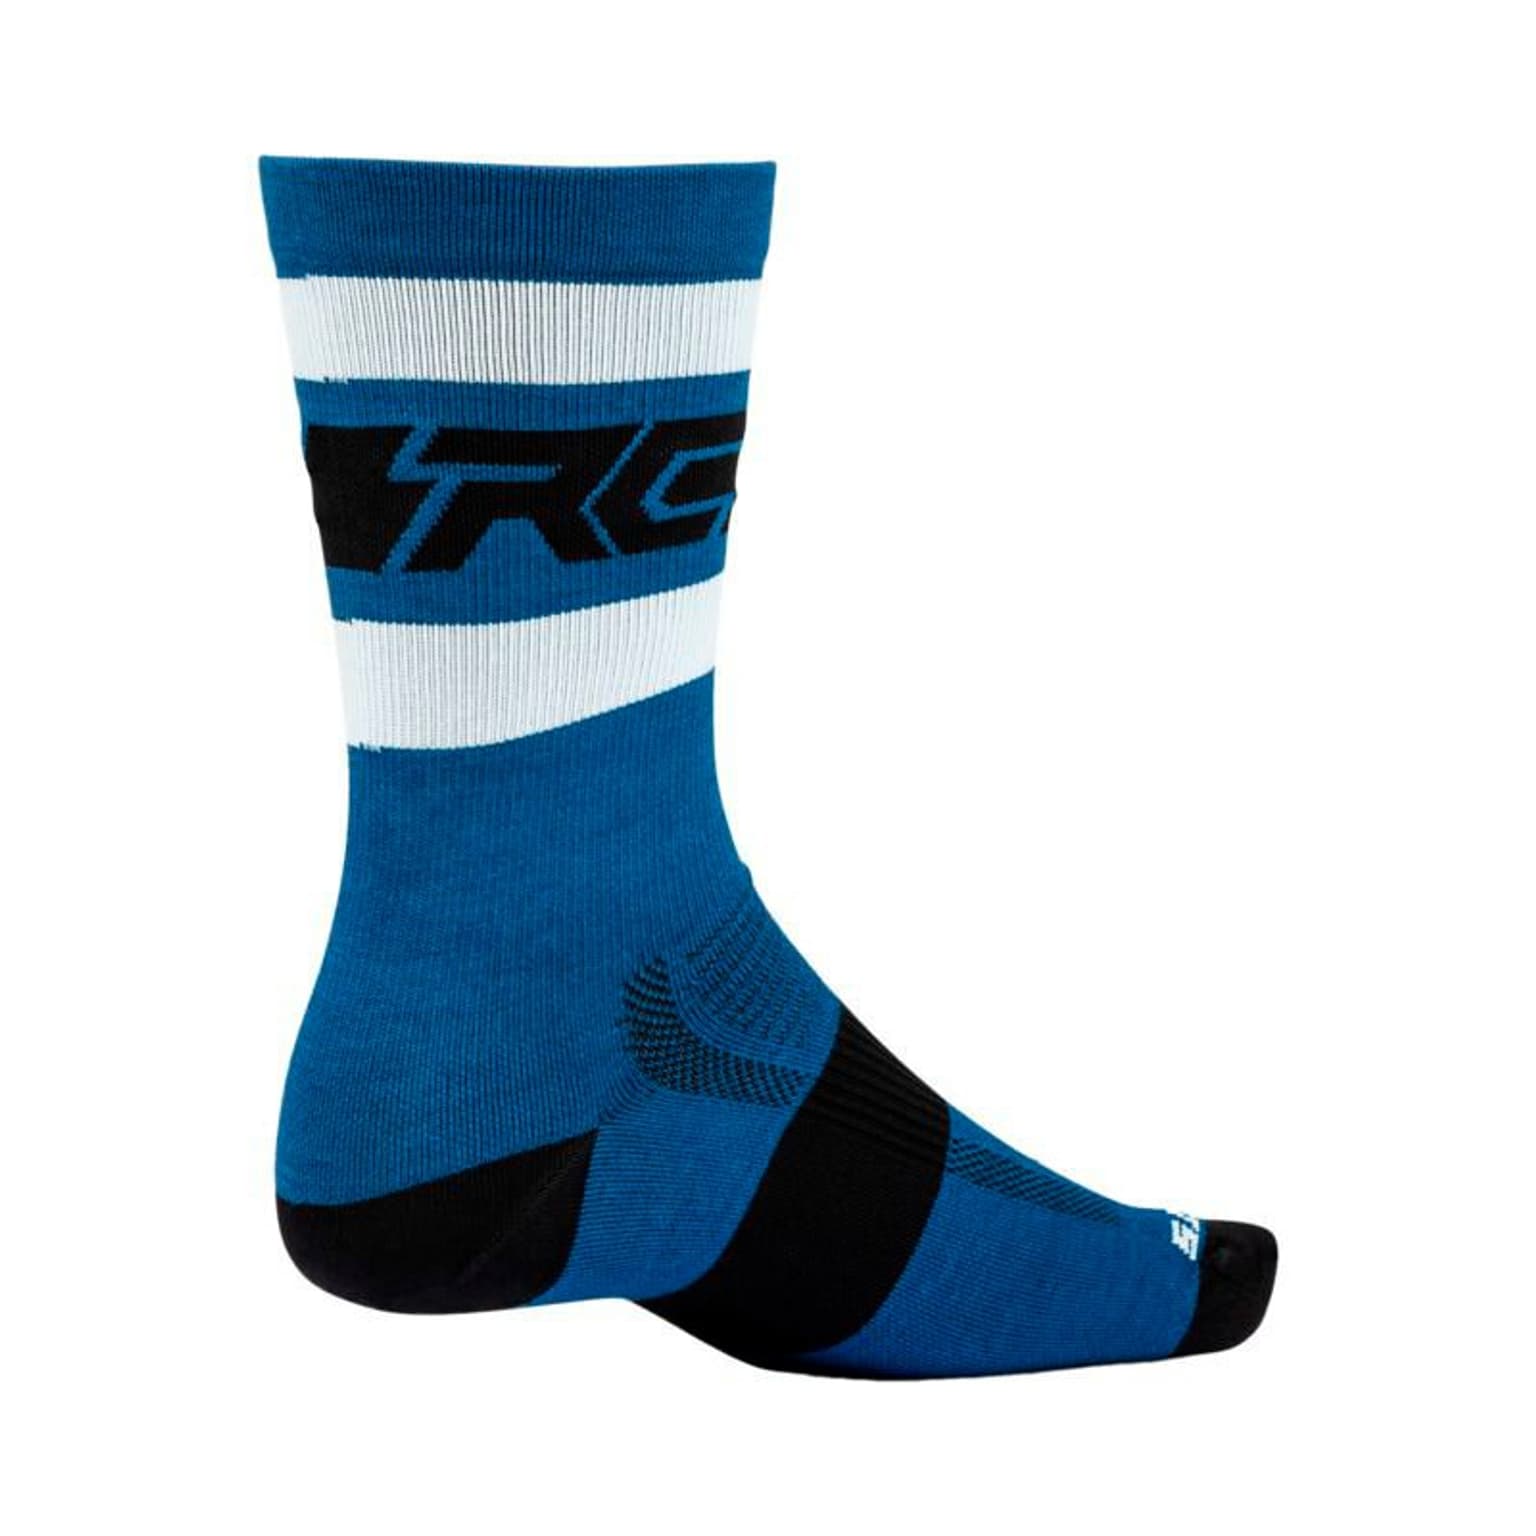 Ride Concepts Ride Concepts Woll Fifty-Fifty Velosocken blau 2